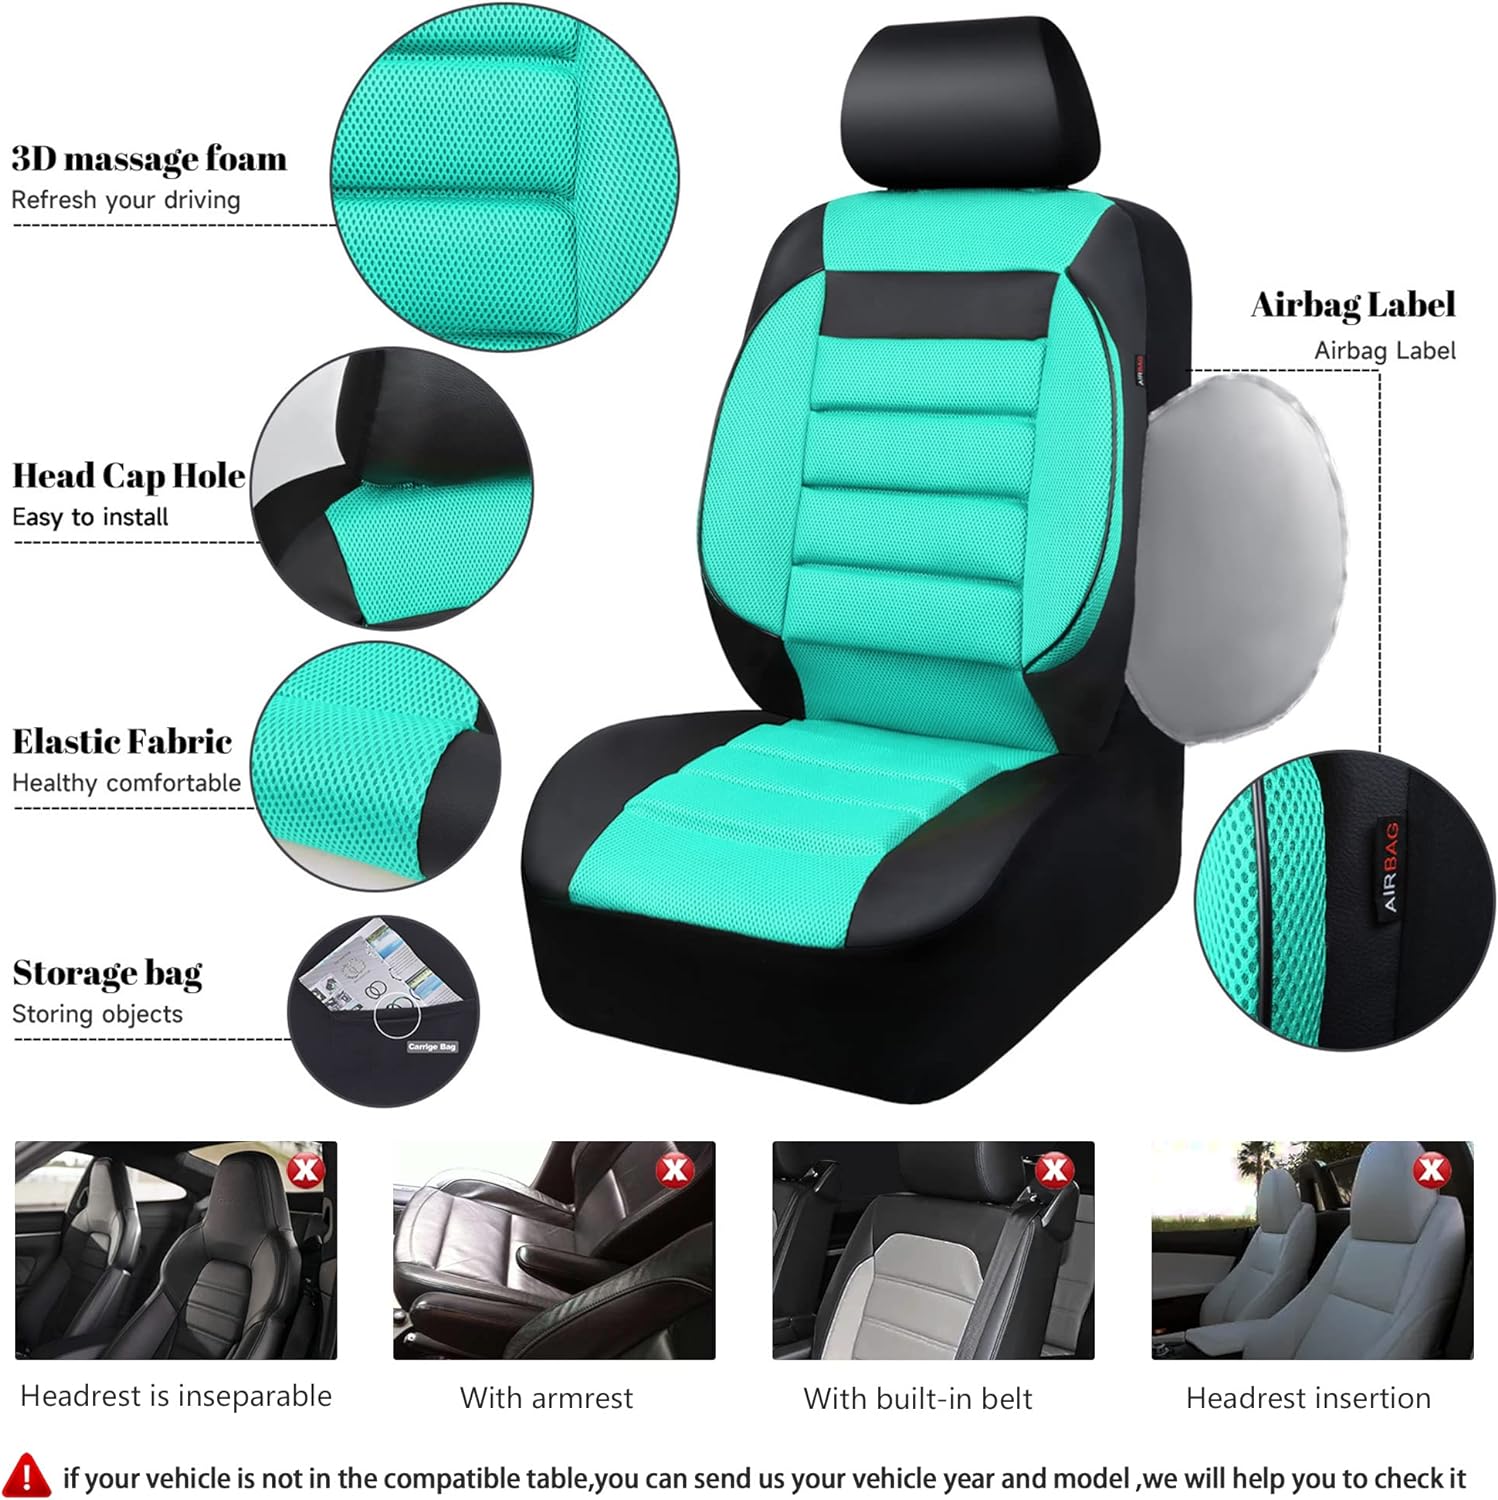 CAR PASS Leather 3D Foam Back Support Car Seat Covers Full Set Air Mesh Automotive Seat Covers, All Season Car Seat Cover Fit Automotive,SUV,Sedan,Van, Airbag Compatible Elegance (Black Charcoal)…